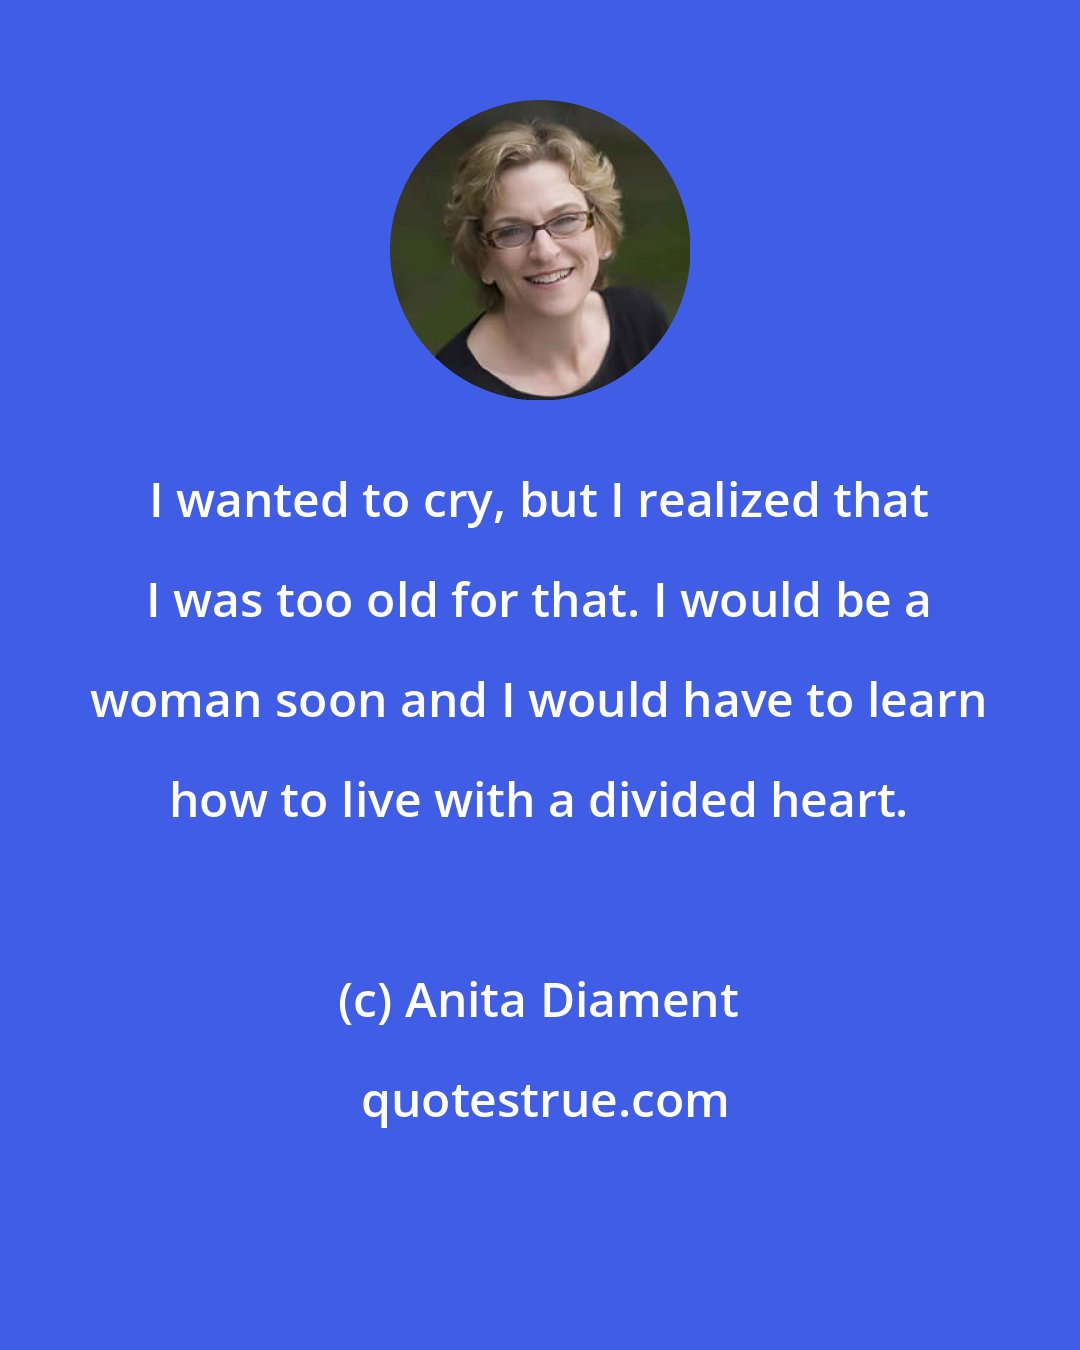 Anita Diament: I wanted to cry, but I realized that I was too old for that. I would be a woman soon and I would have to learn how to live with a divided heart.